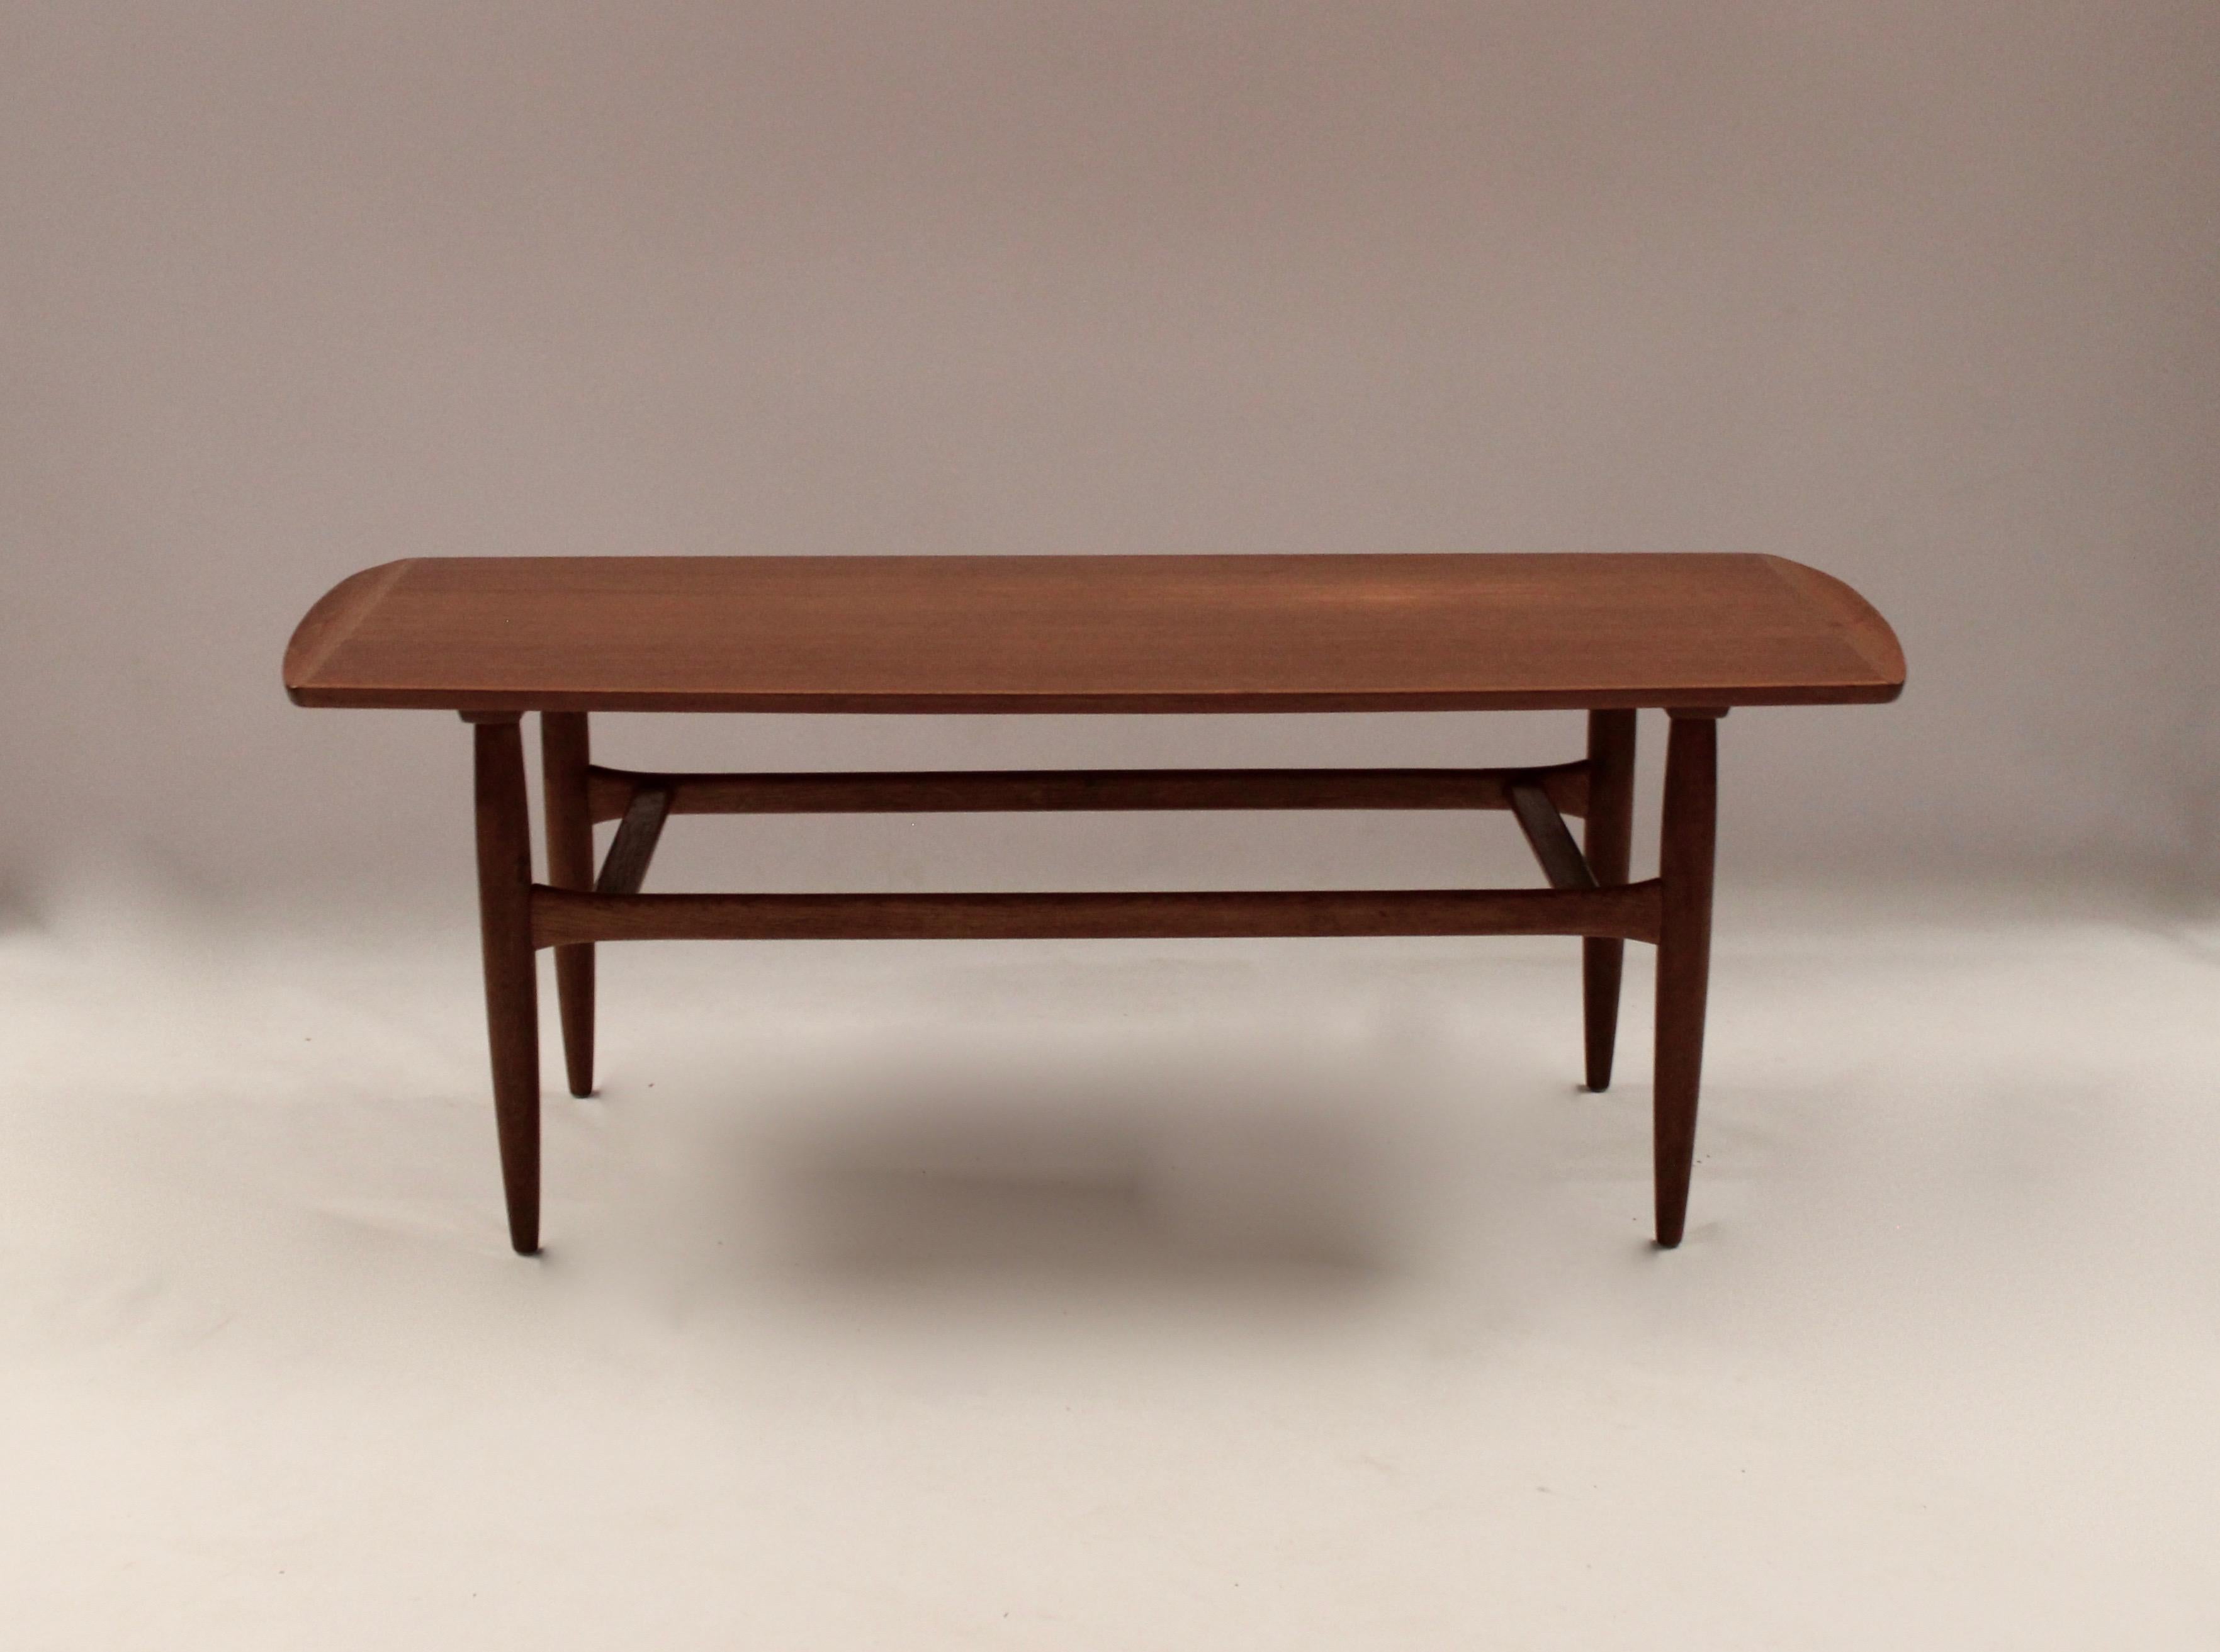 This coffee table is an example of classic Danish design from the 1960s and is made of teak wood, which gives it a warm and inviting appearance. The table has a simple and elegant silhouette that fits perfectly with the period-typical Scandinavian